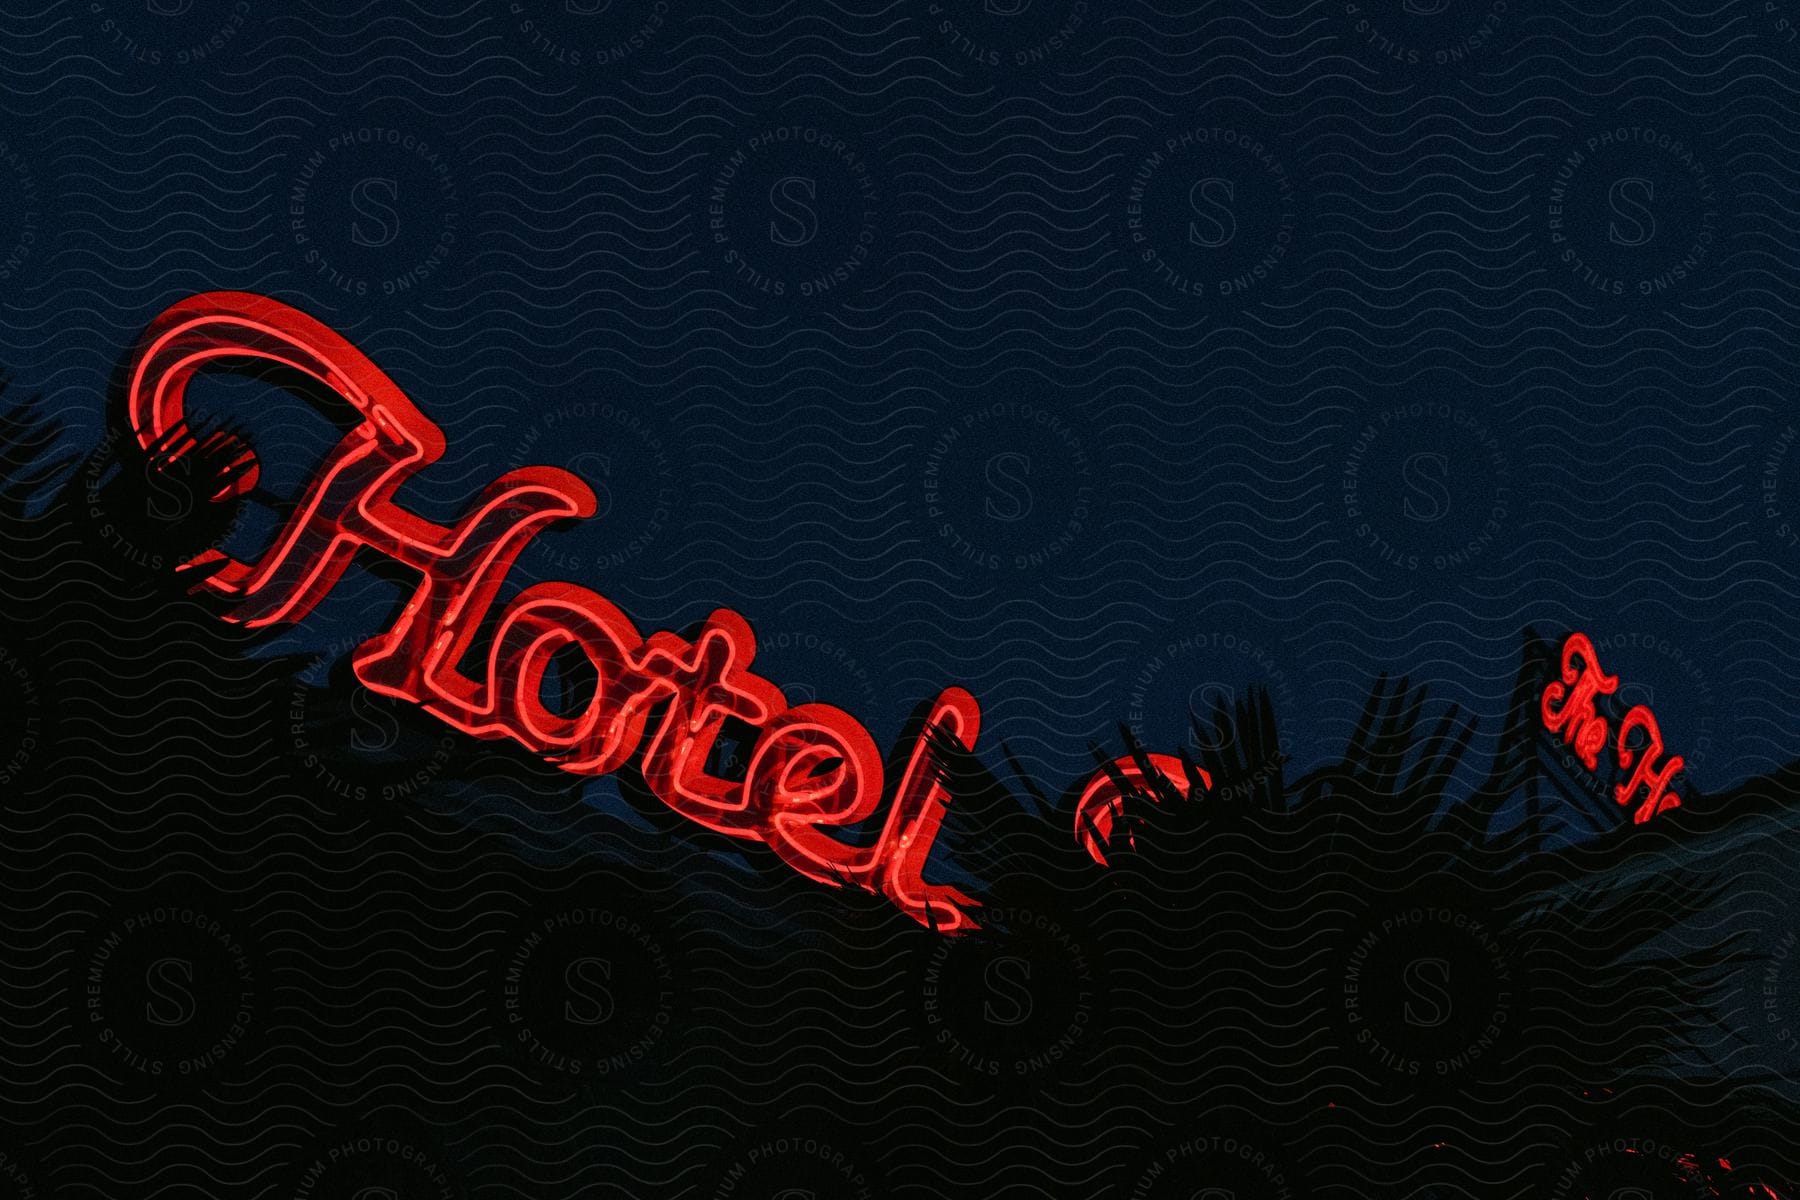 A hotels neon sign glowing brightly in the night